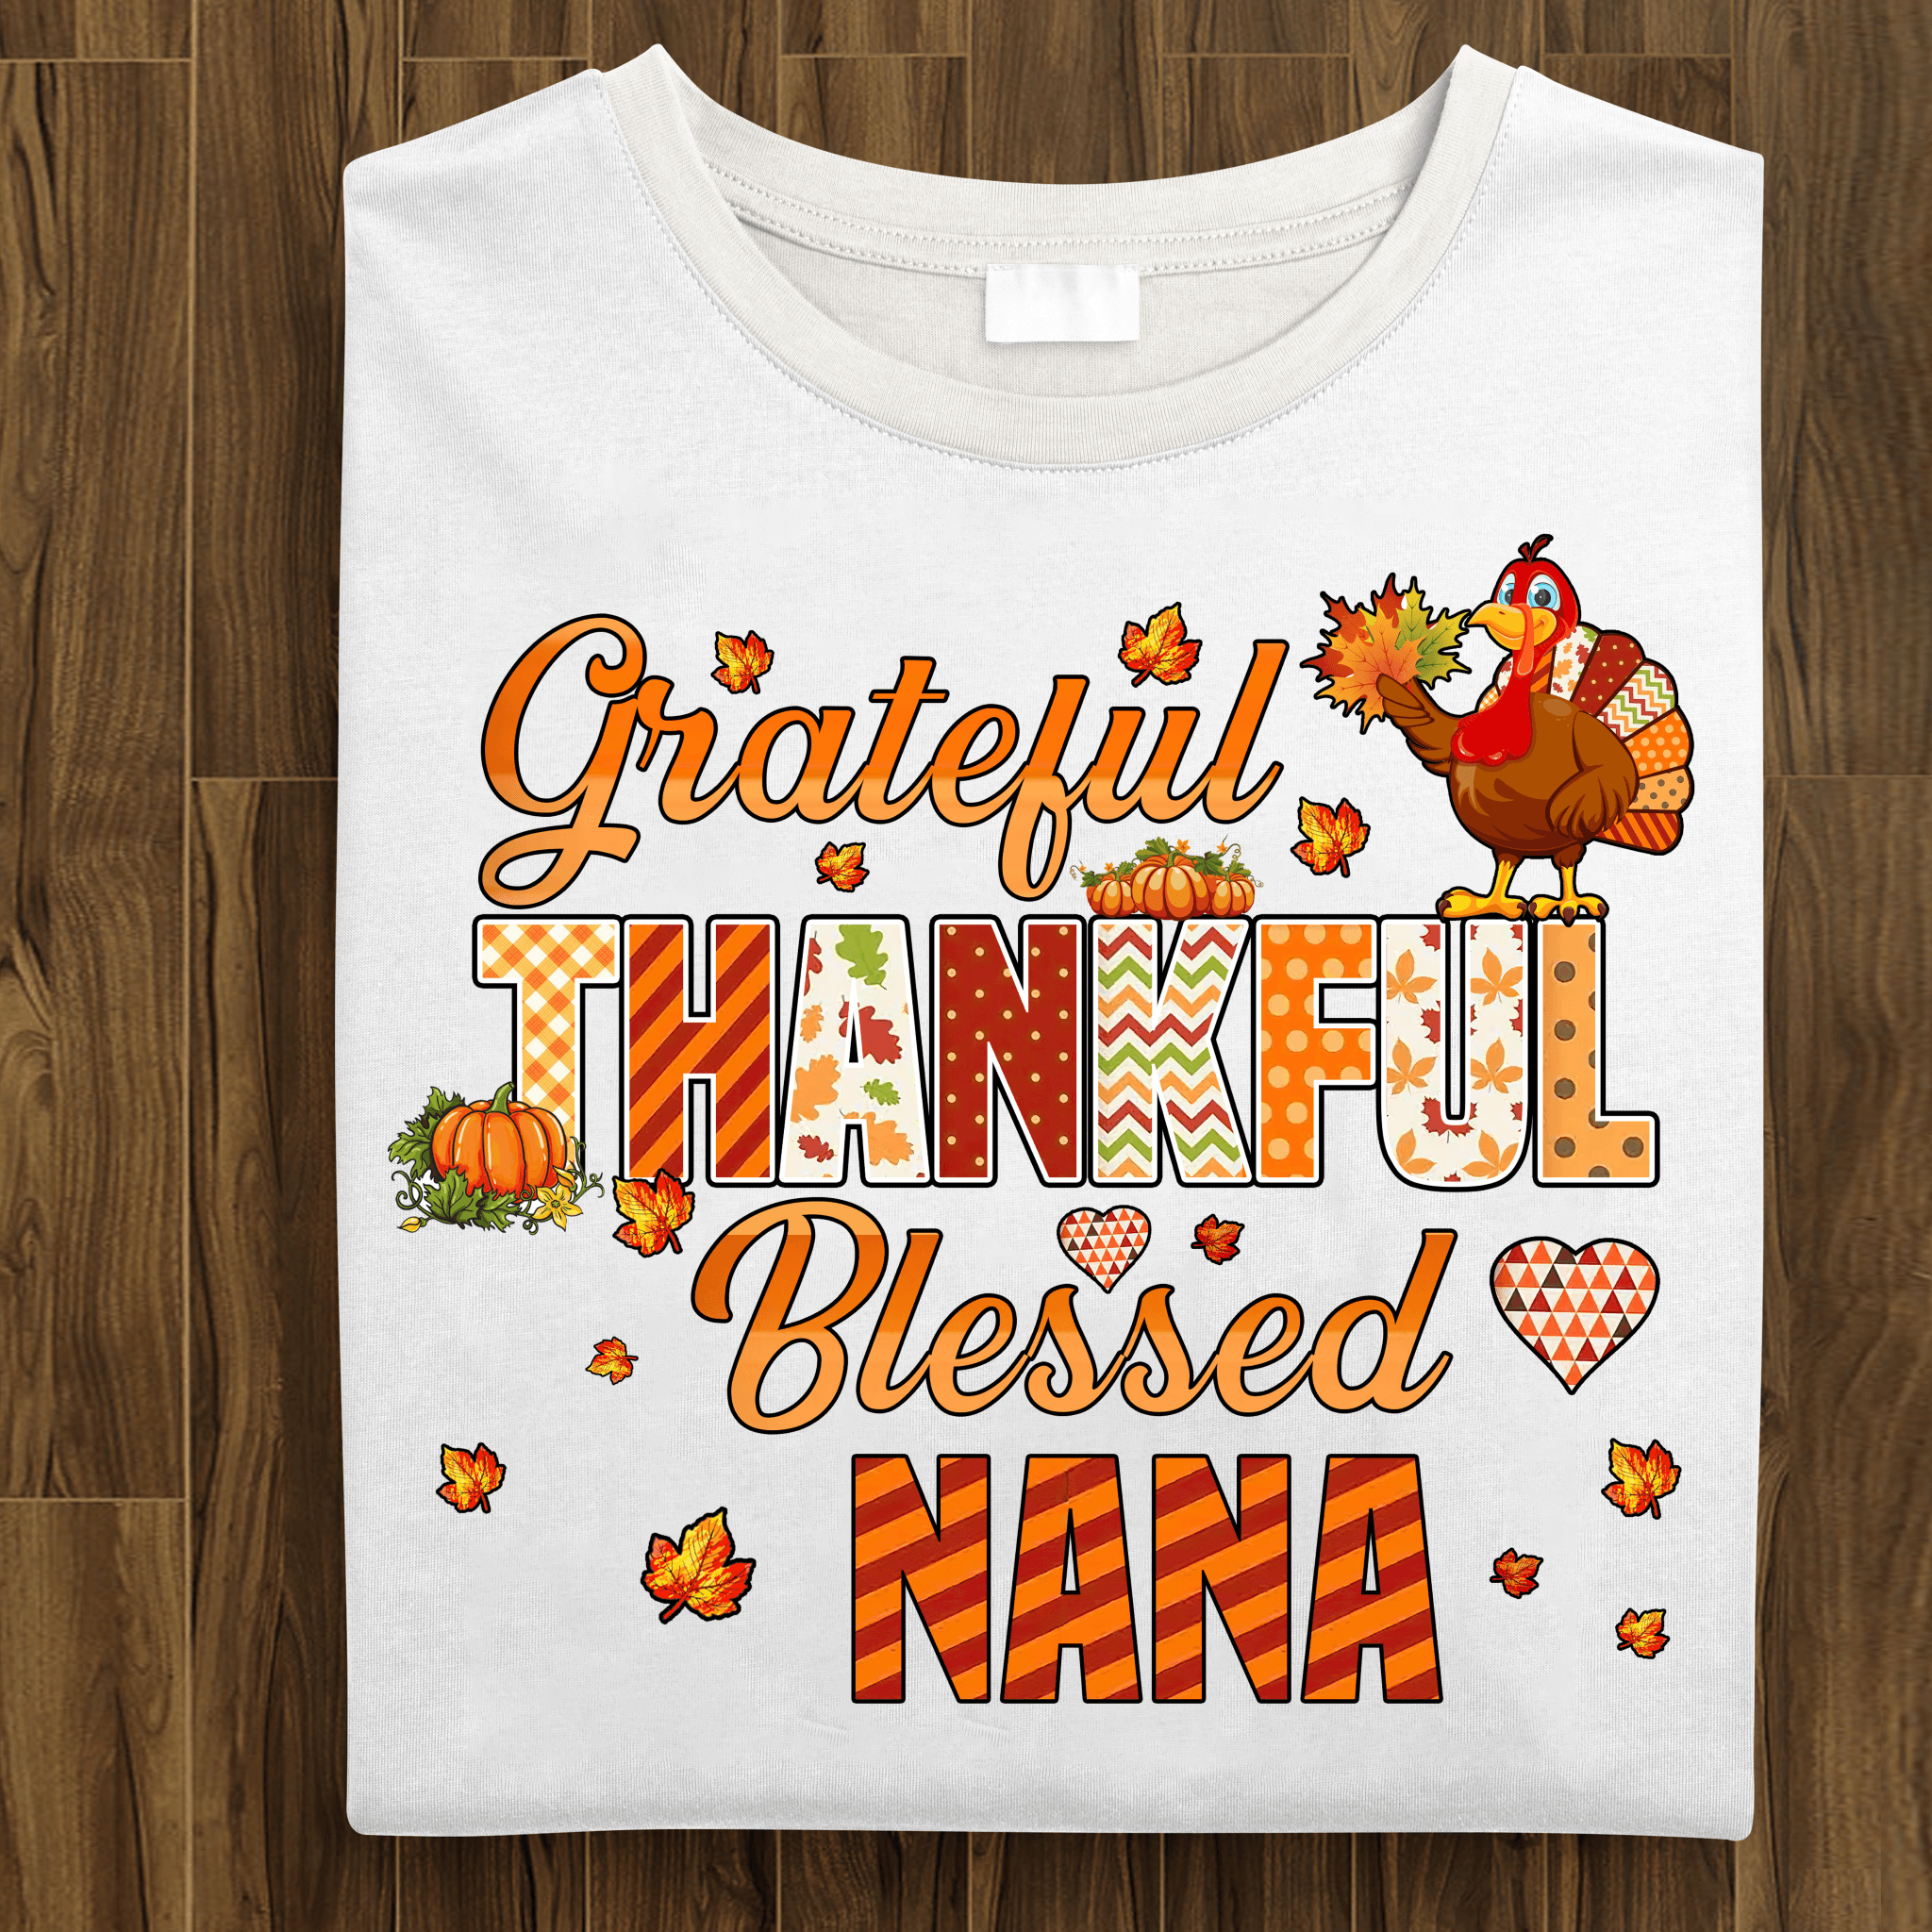 Grateful Thankful Blessed Grandma Personalized T-shirt, Personalized Gift for Nana, Grandma, Grandmother, Grandparents - TS133PS06 - BMGifts